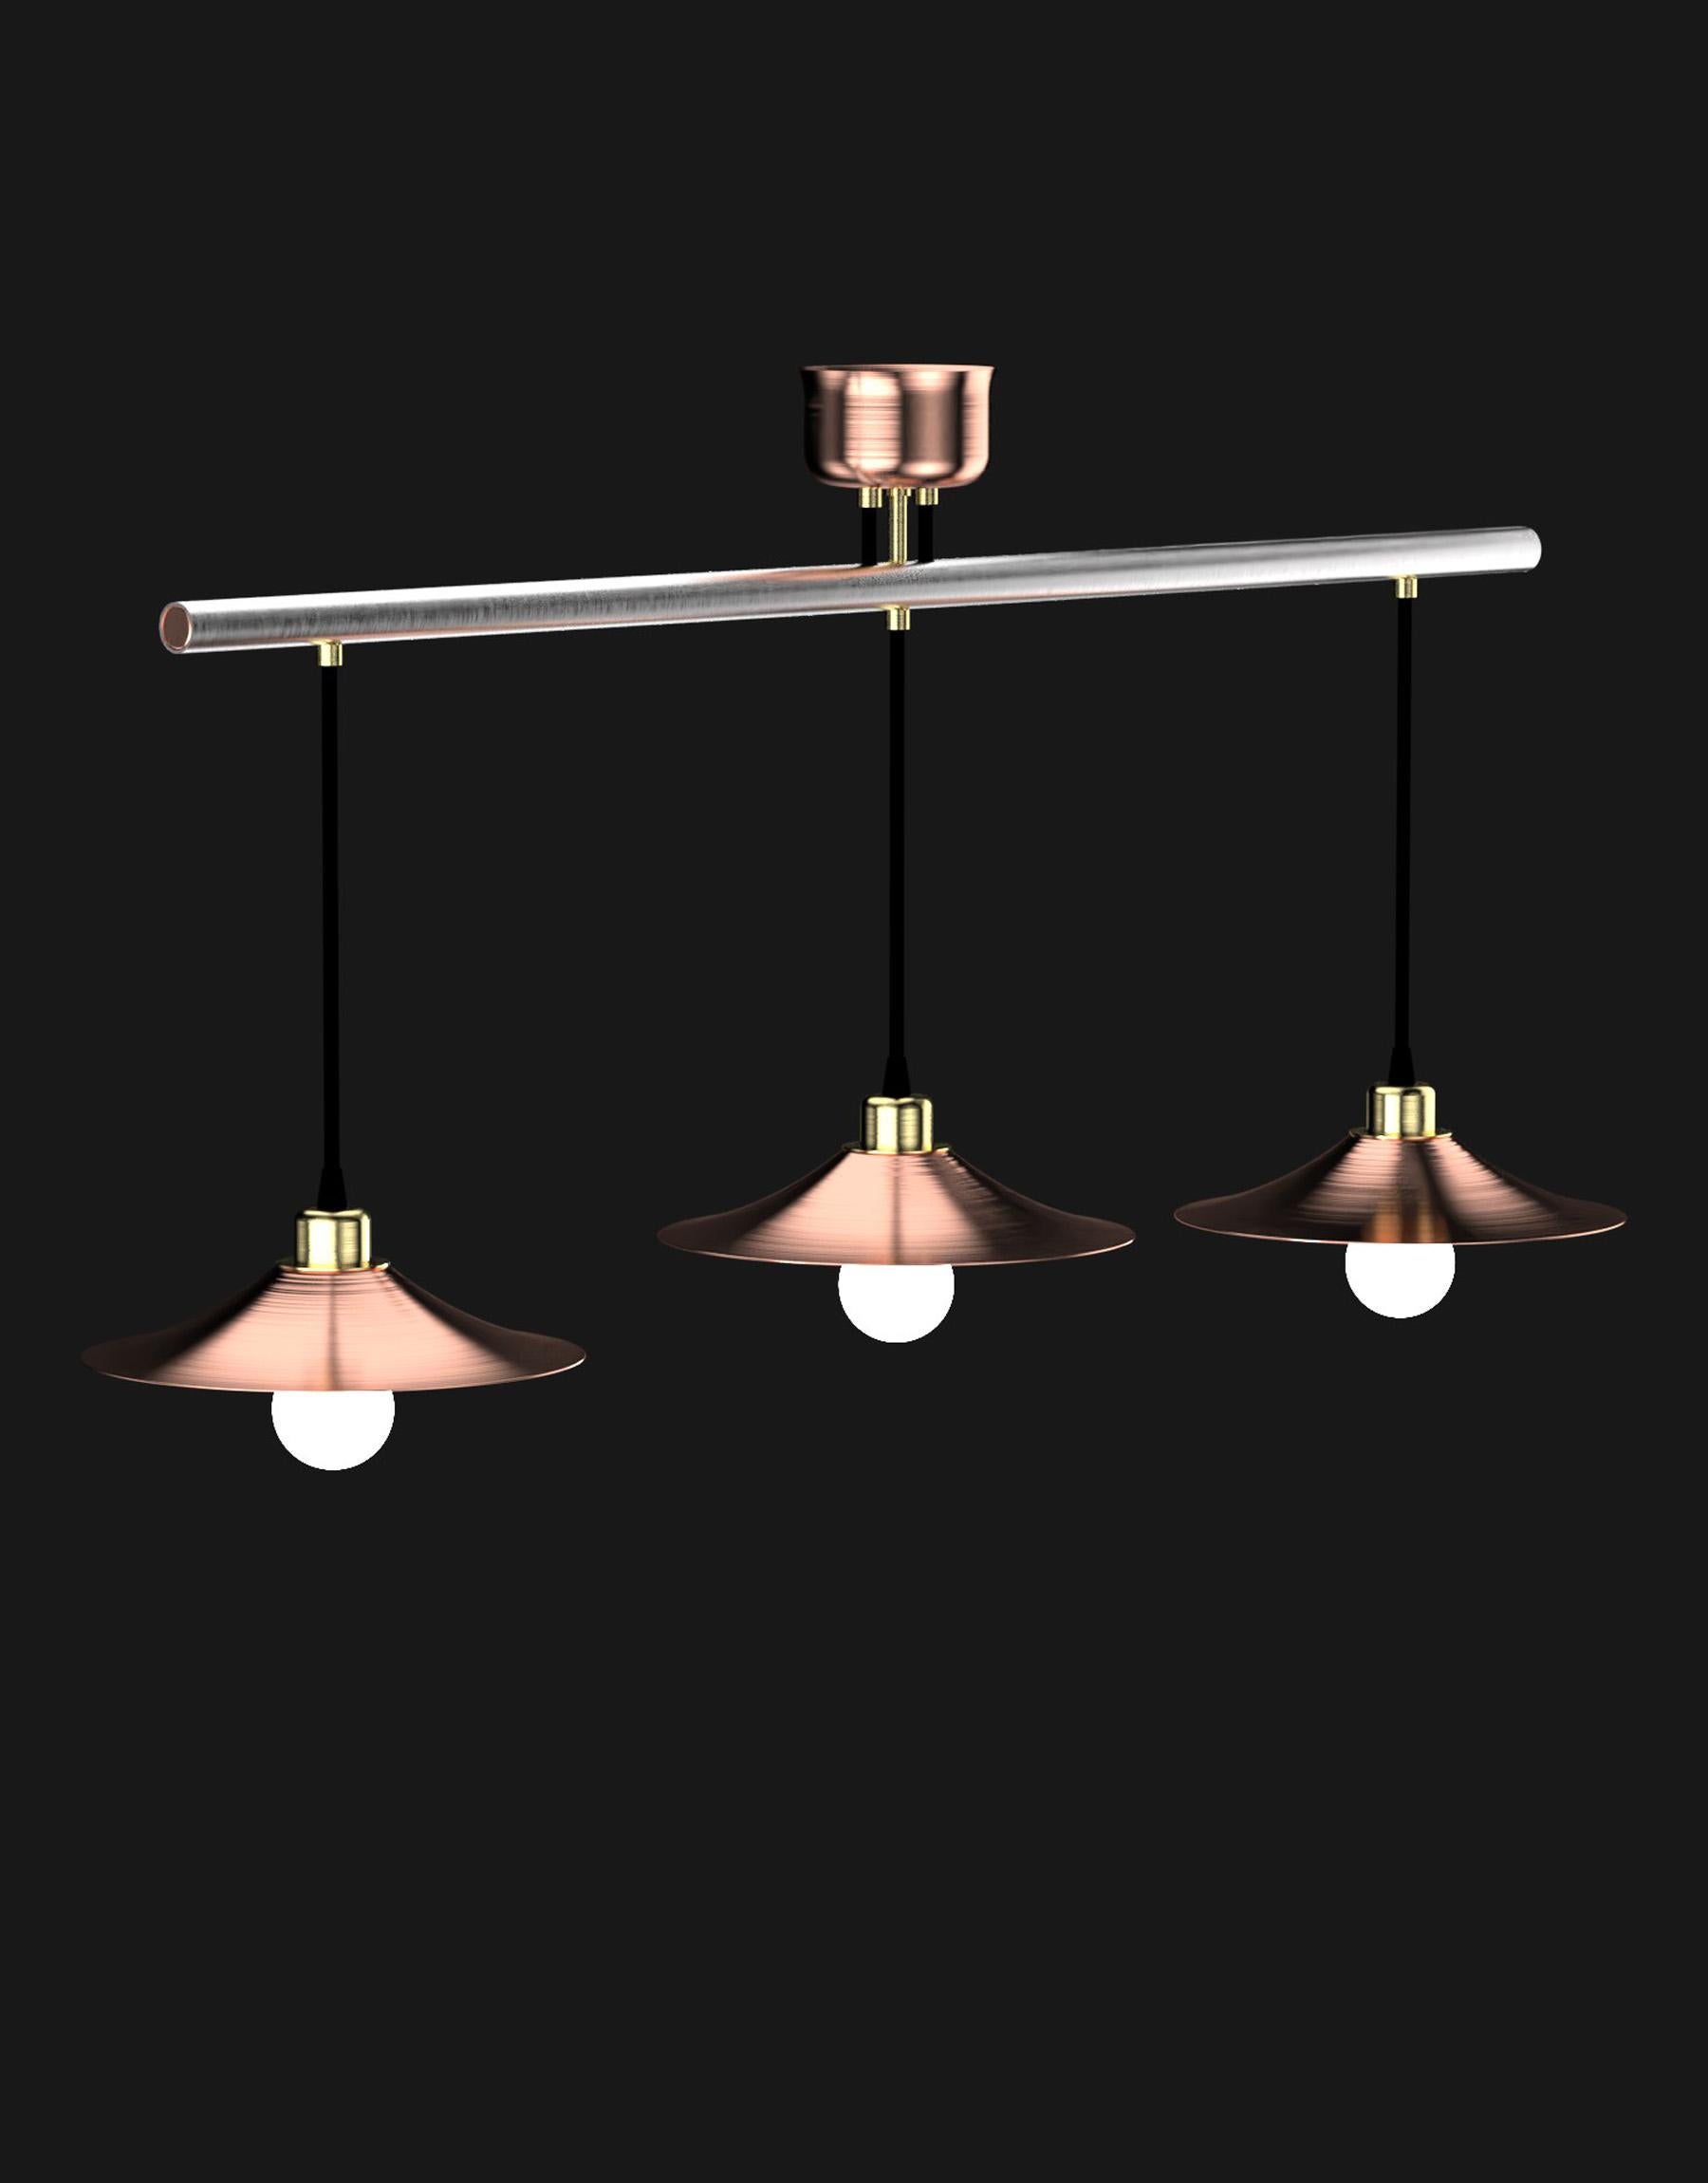 Made from genuine brass and 304L stainless steel, this luminaire is our interpretation of an industrial pendant. The elegance of the raw material is omnipresent in the stainless steel tubes and brass ceiling lights. A perfect blend of elegance and